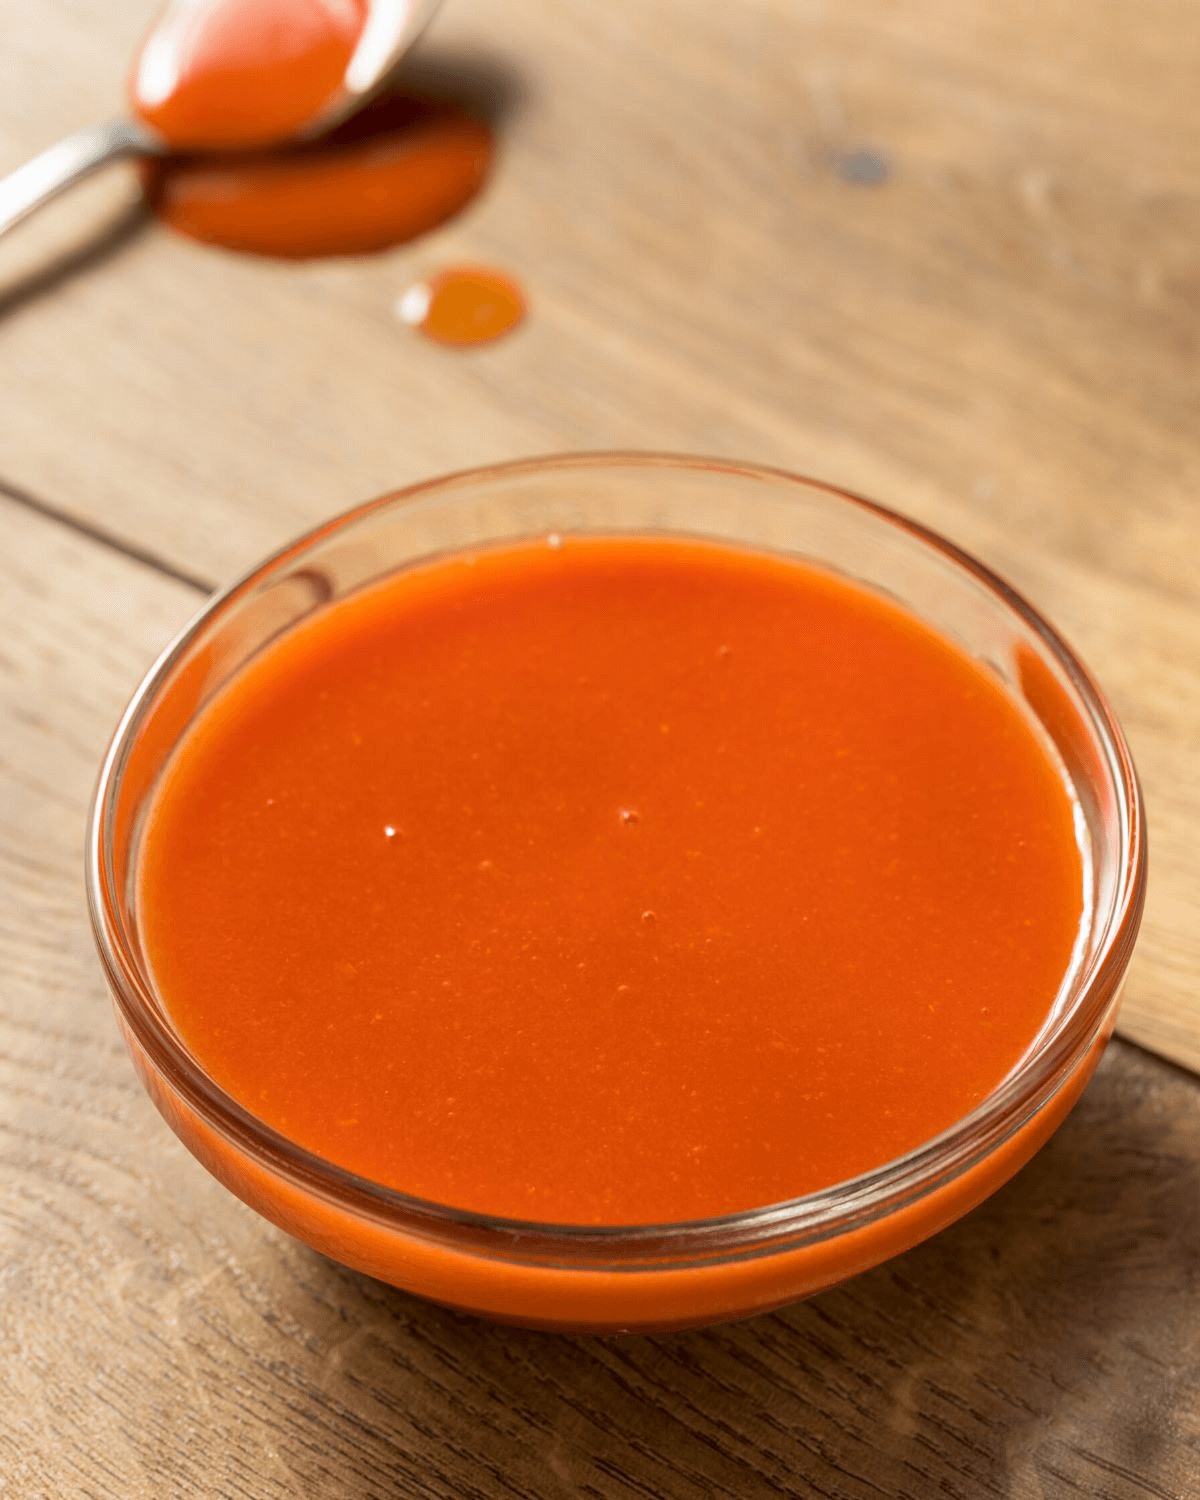 A clear glass dish of the best chicken wing sauce.